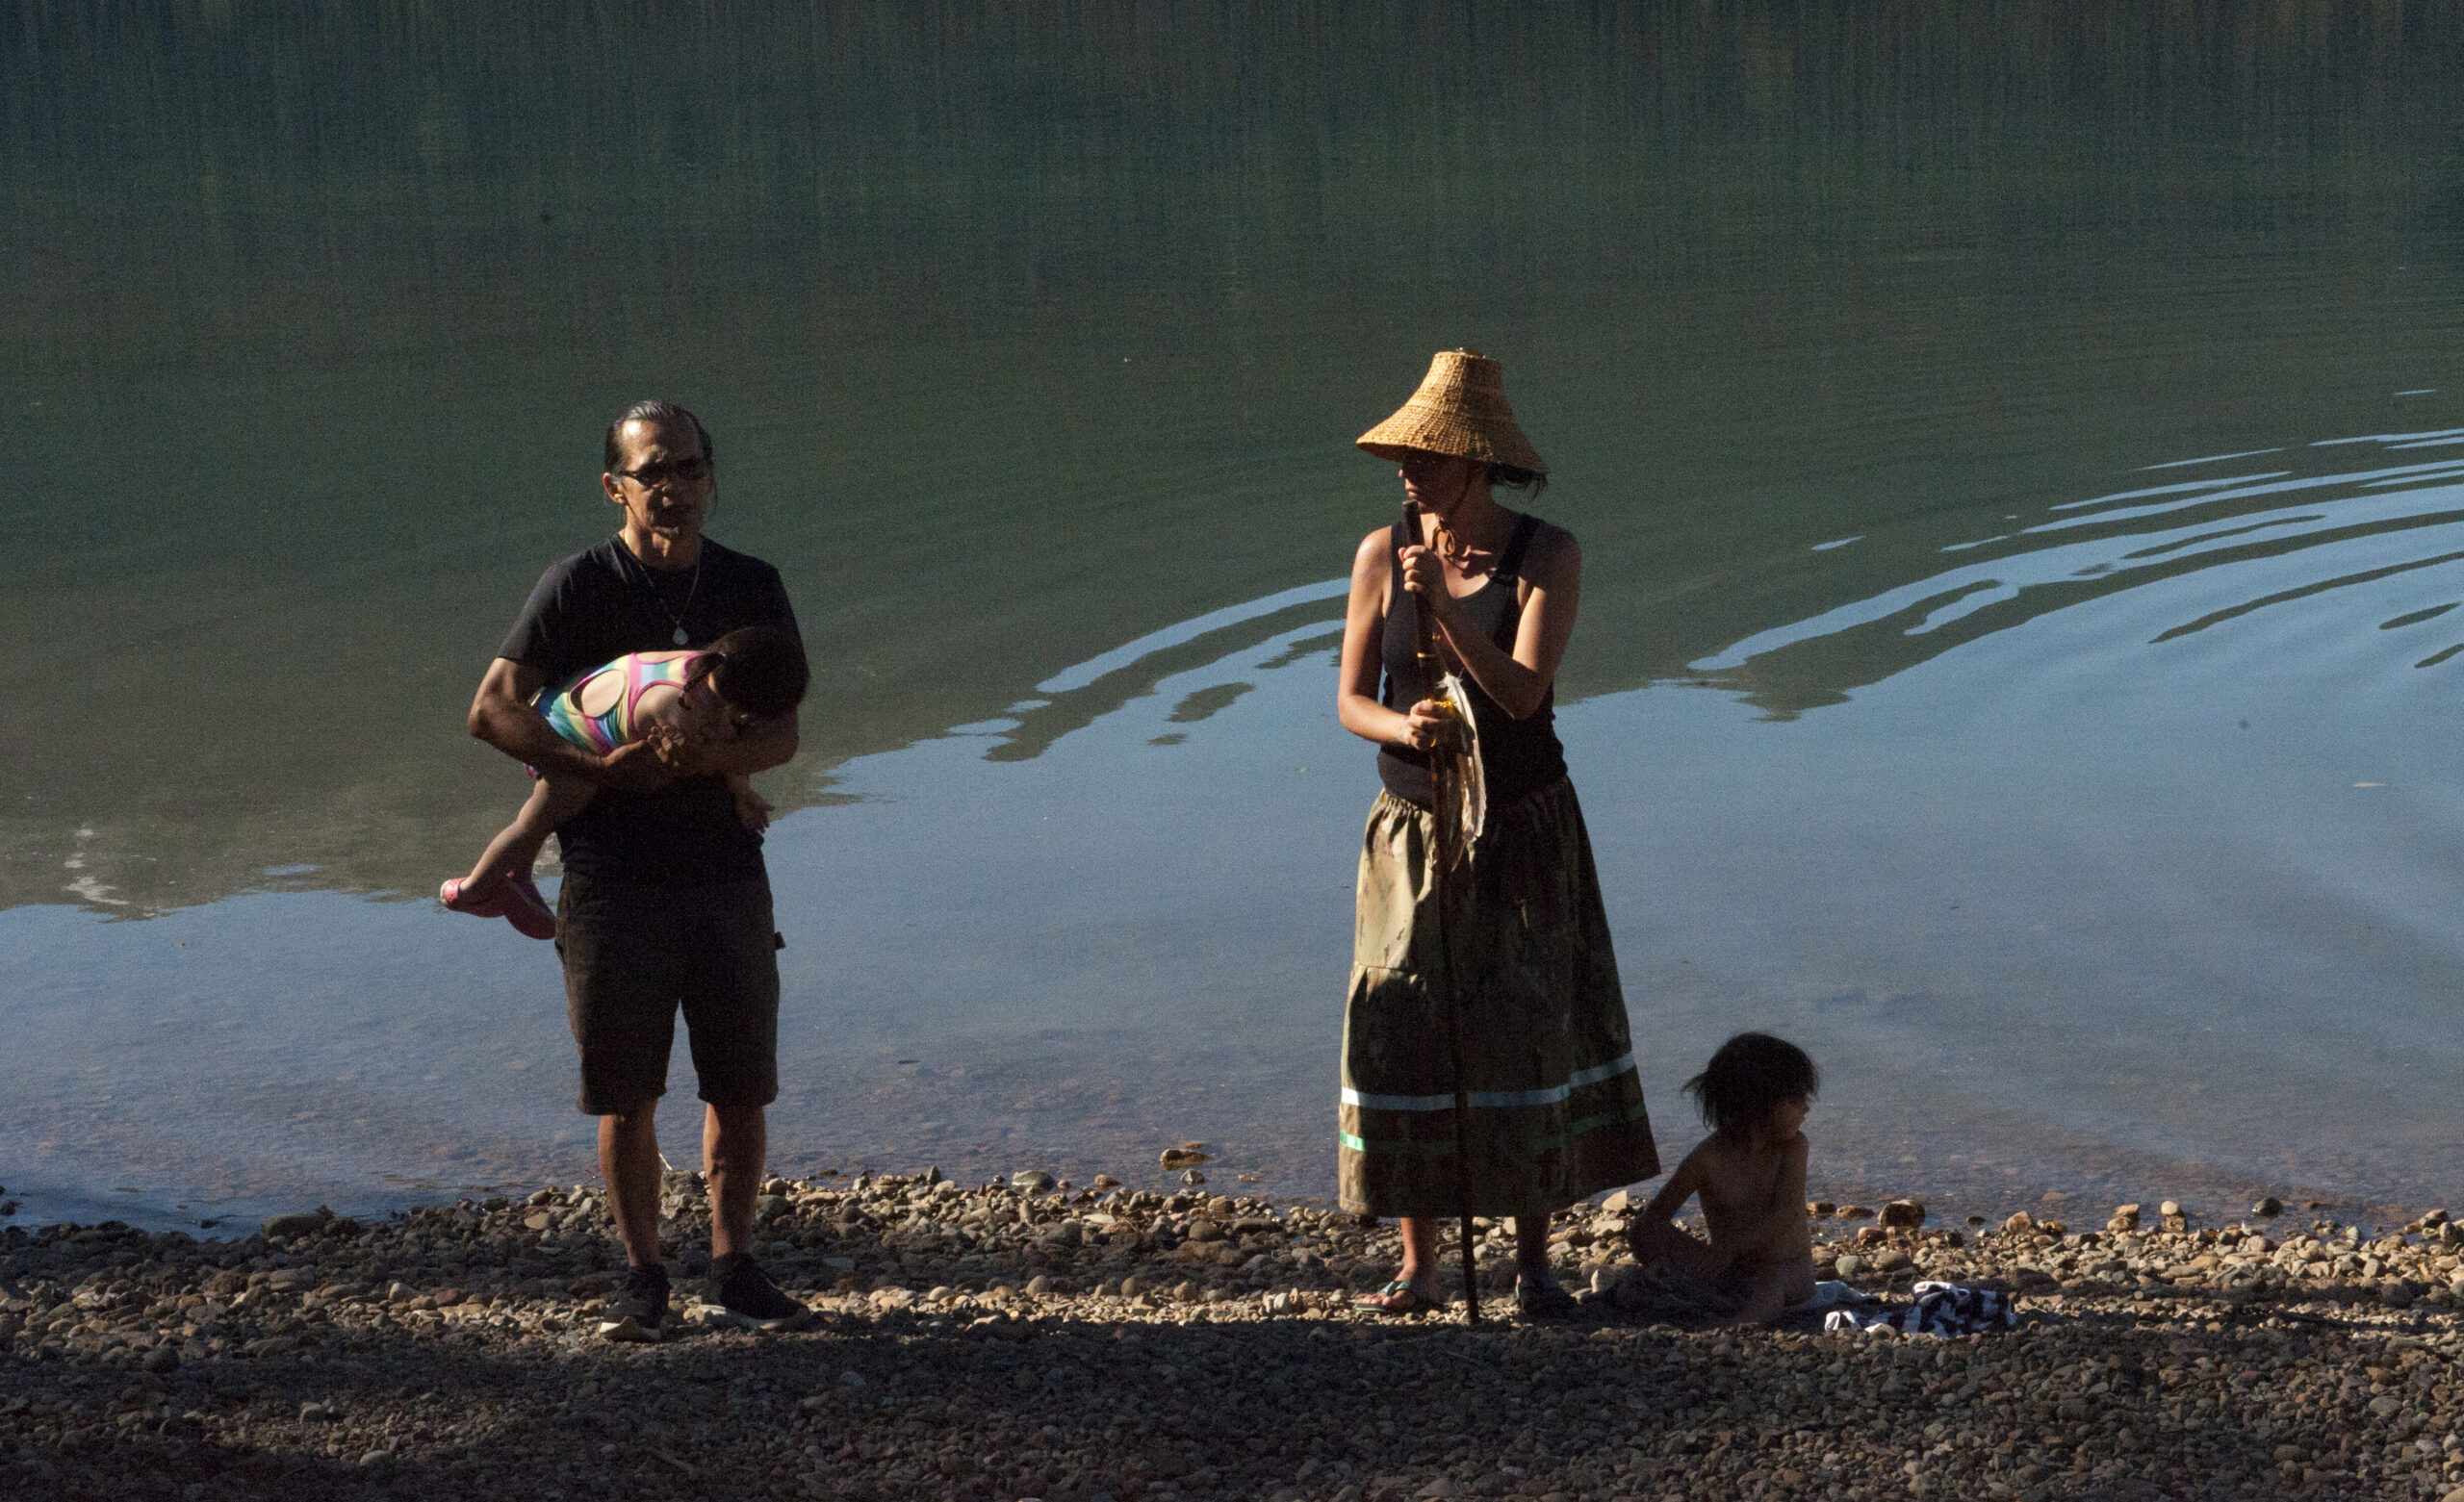 Wet'suwet'en Hereditary Chief Woos and Sleydo' Molly Wickham stand on the shore of Wedzin Bin (Morice Lake). Woos holds one of his children, while Wickham's daughter sits at her feet